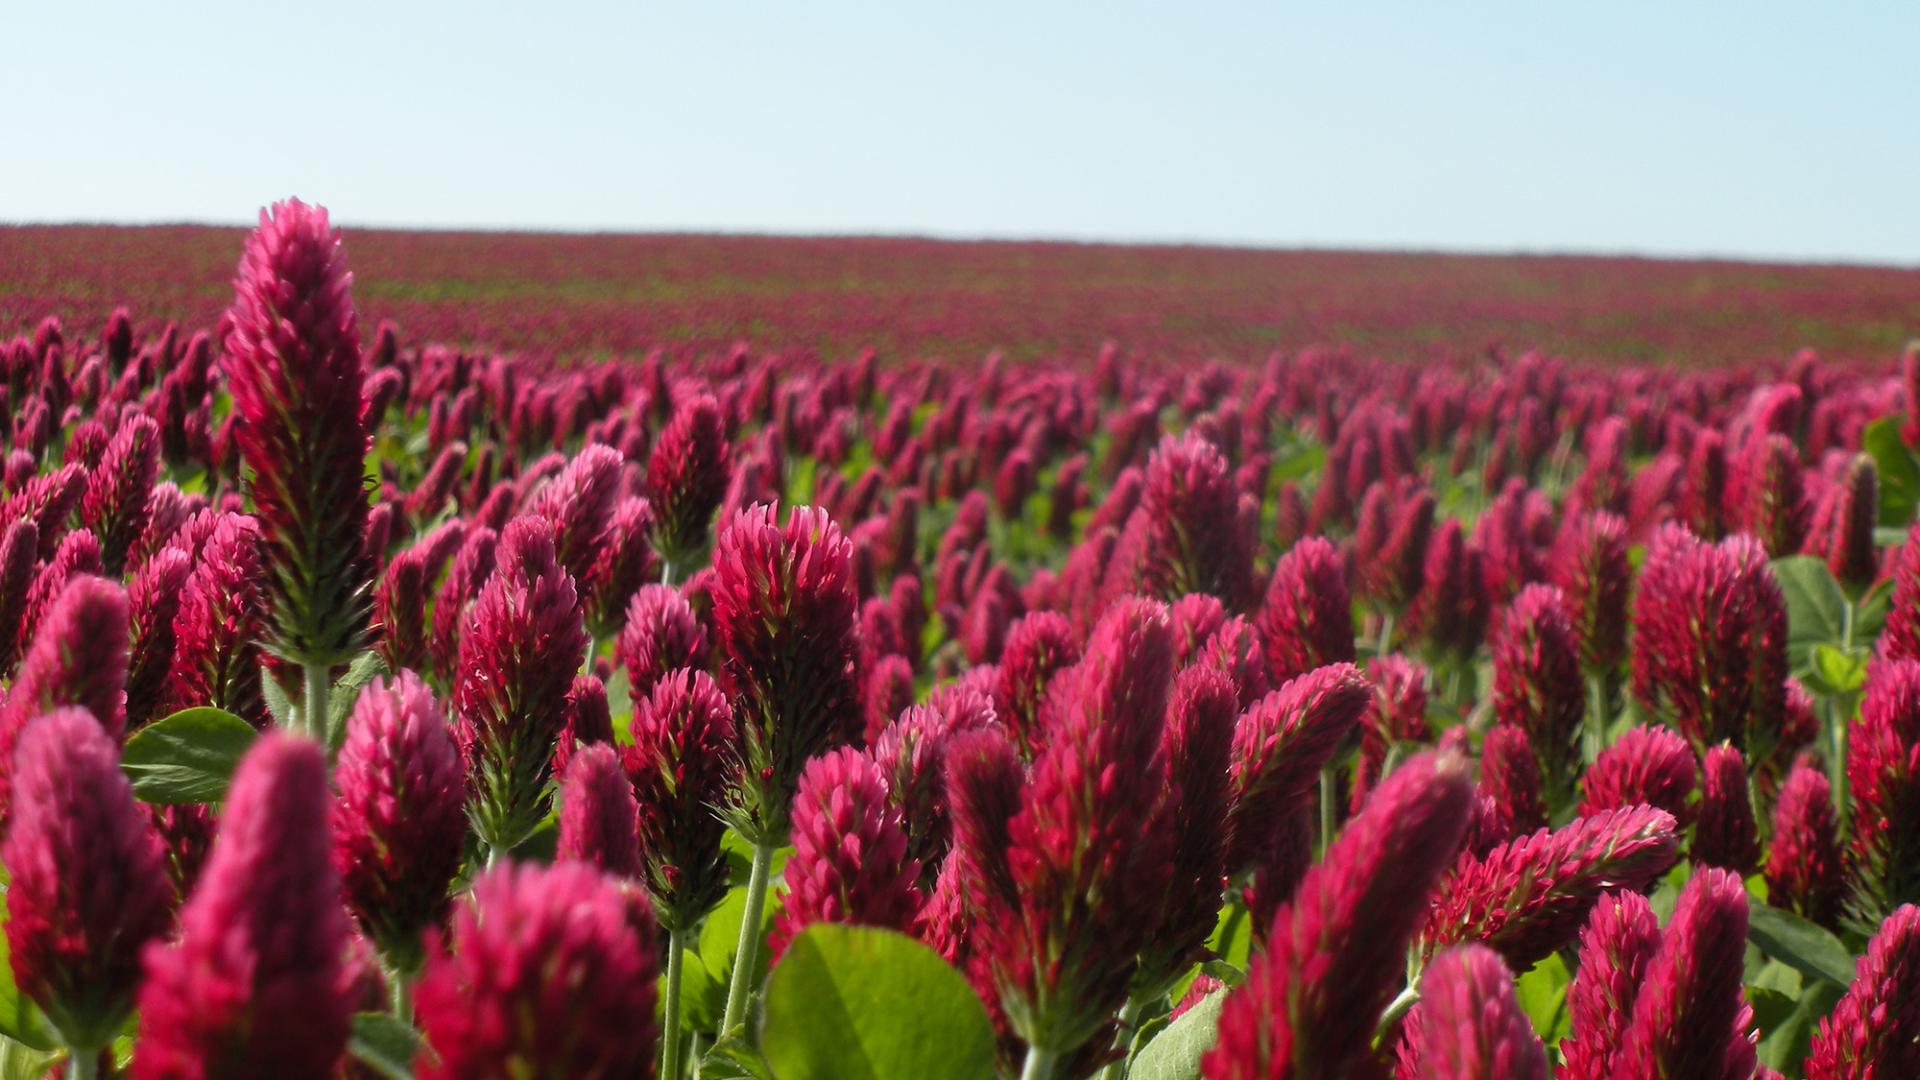 Rokali – The clover that helps farmers fight climate change